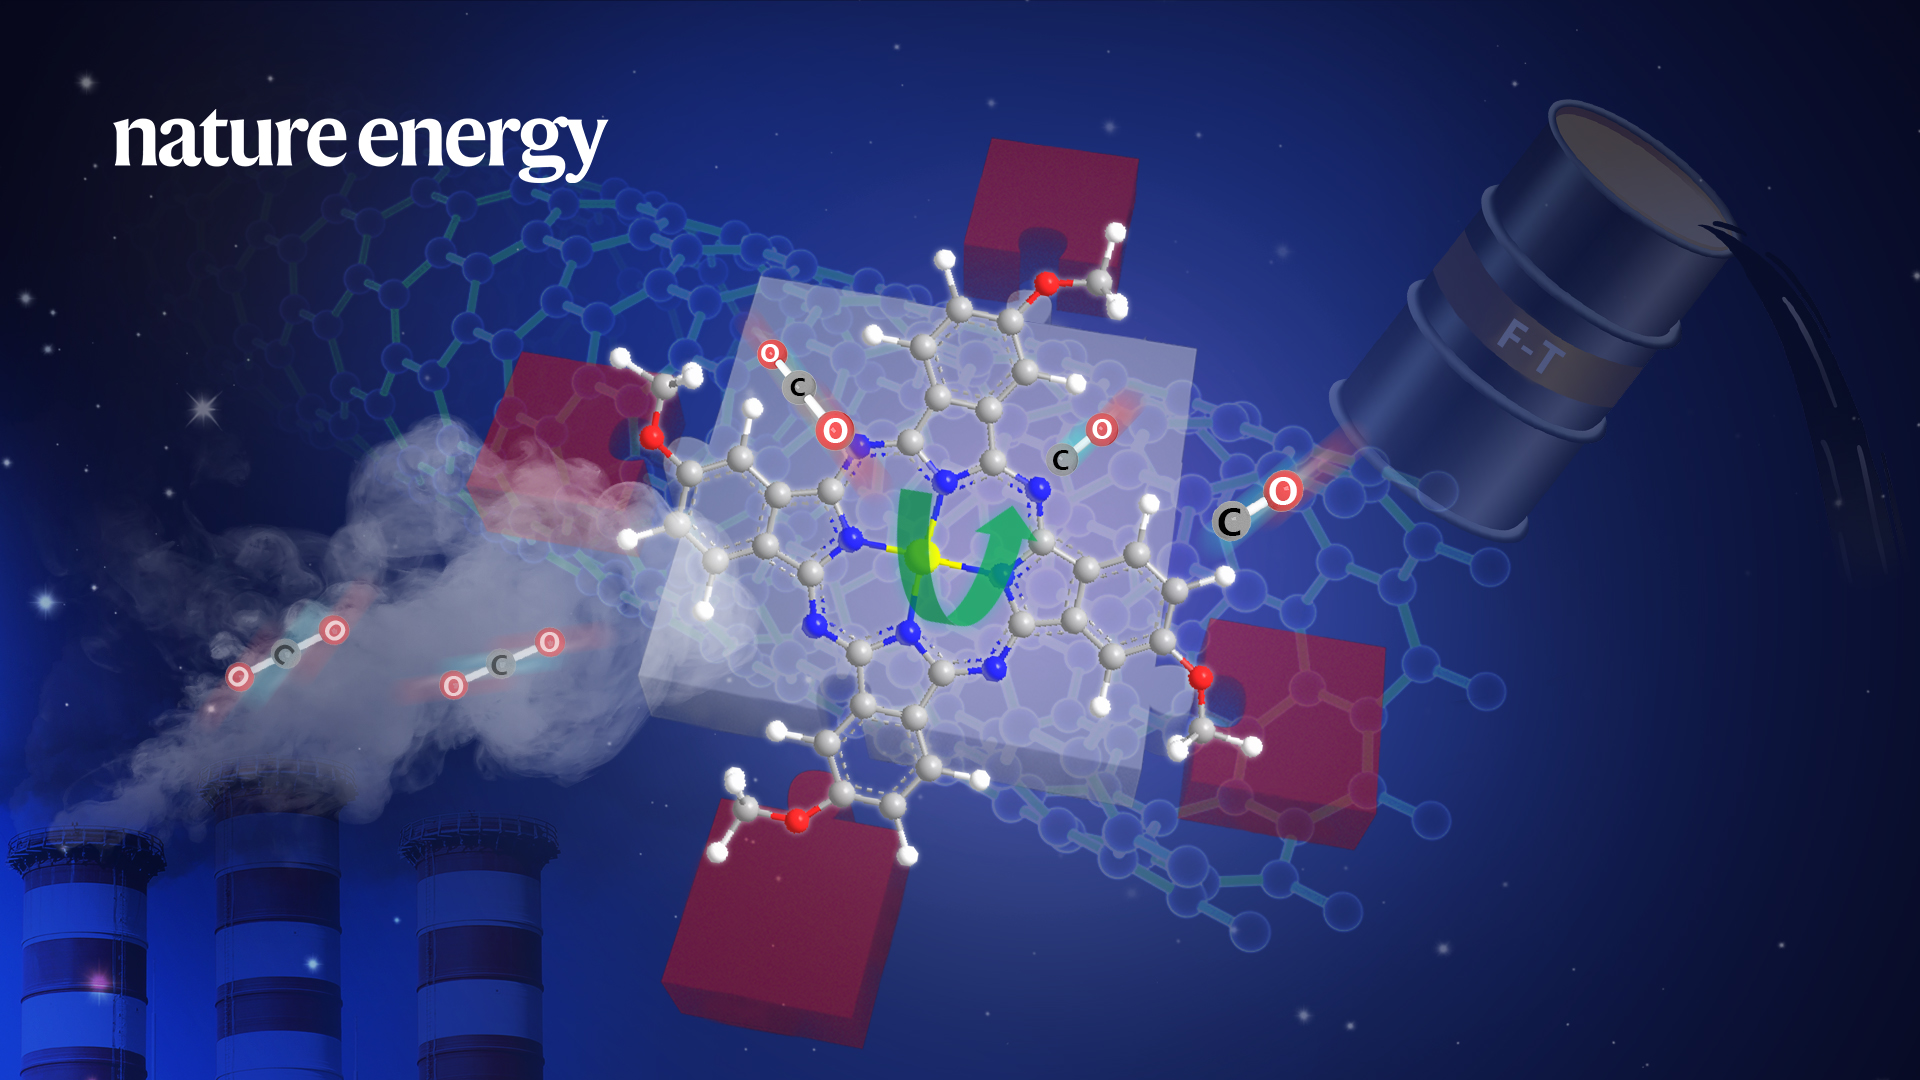 Molecular engineering of electrocatalysts could lead to a cleaner future